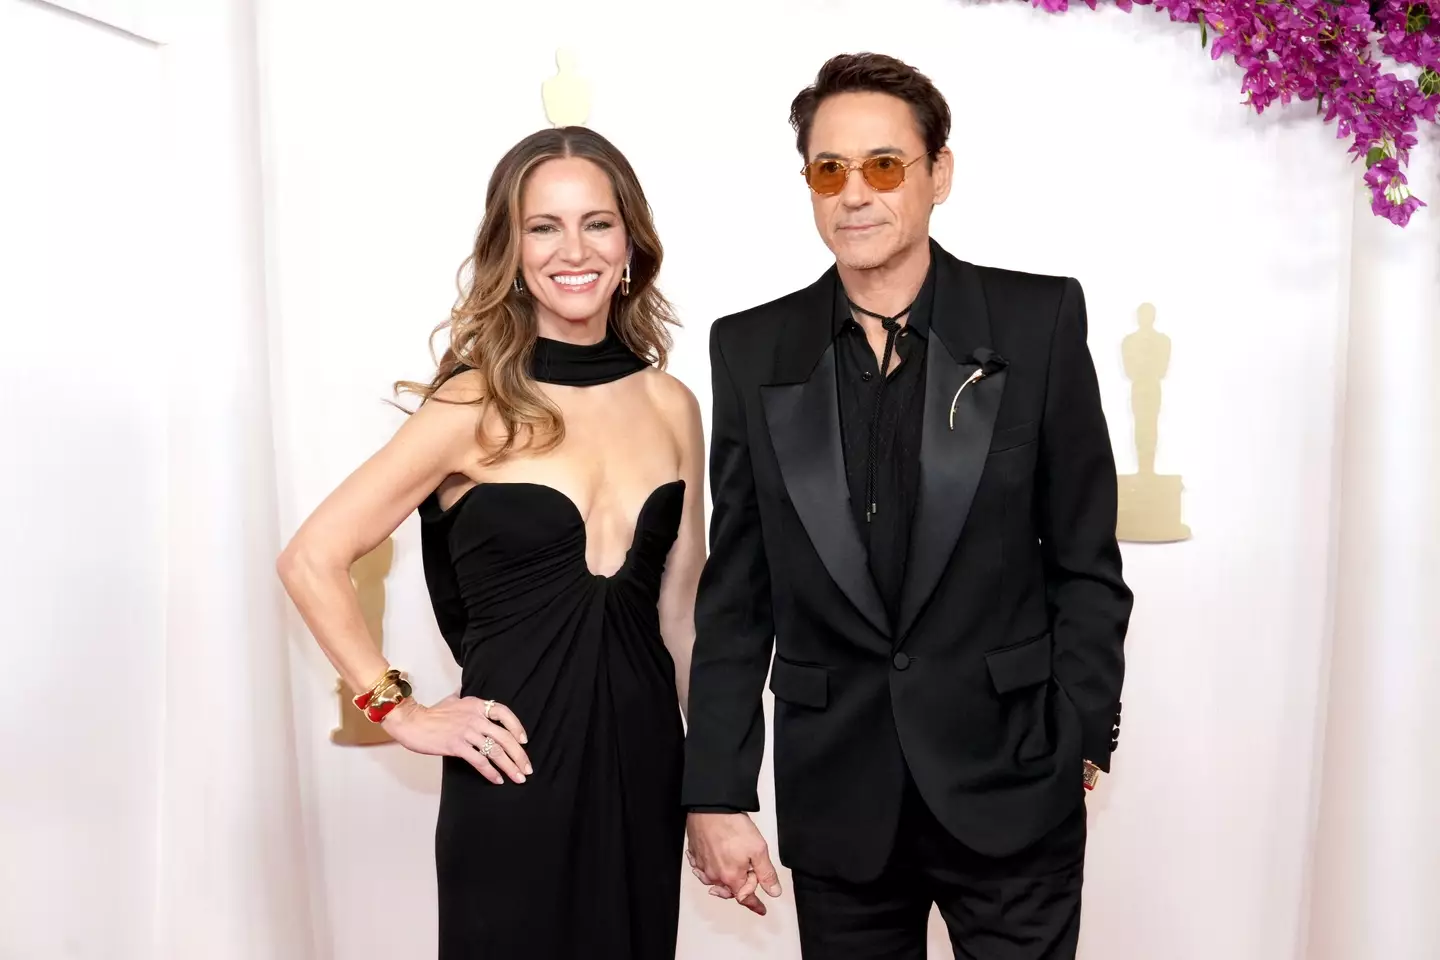 Susan Downey has explained how she and husband Robert Downey Jr. maintain a successful marriage.